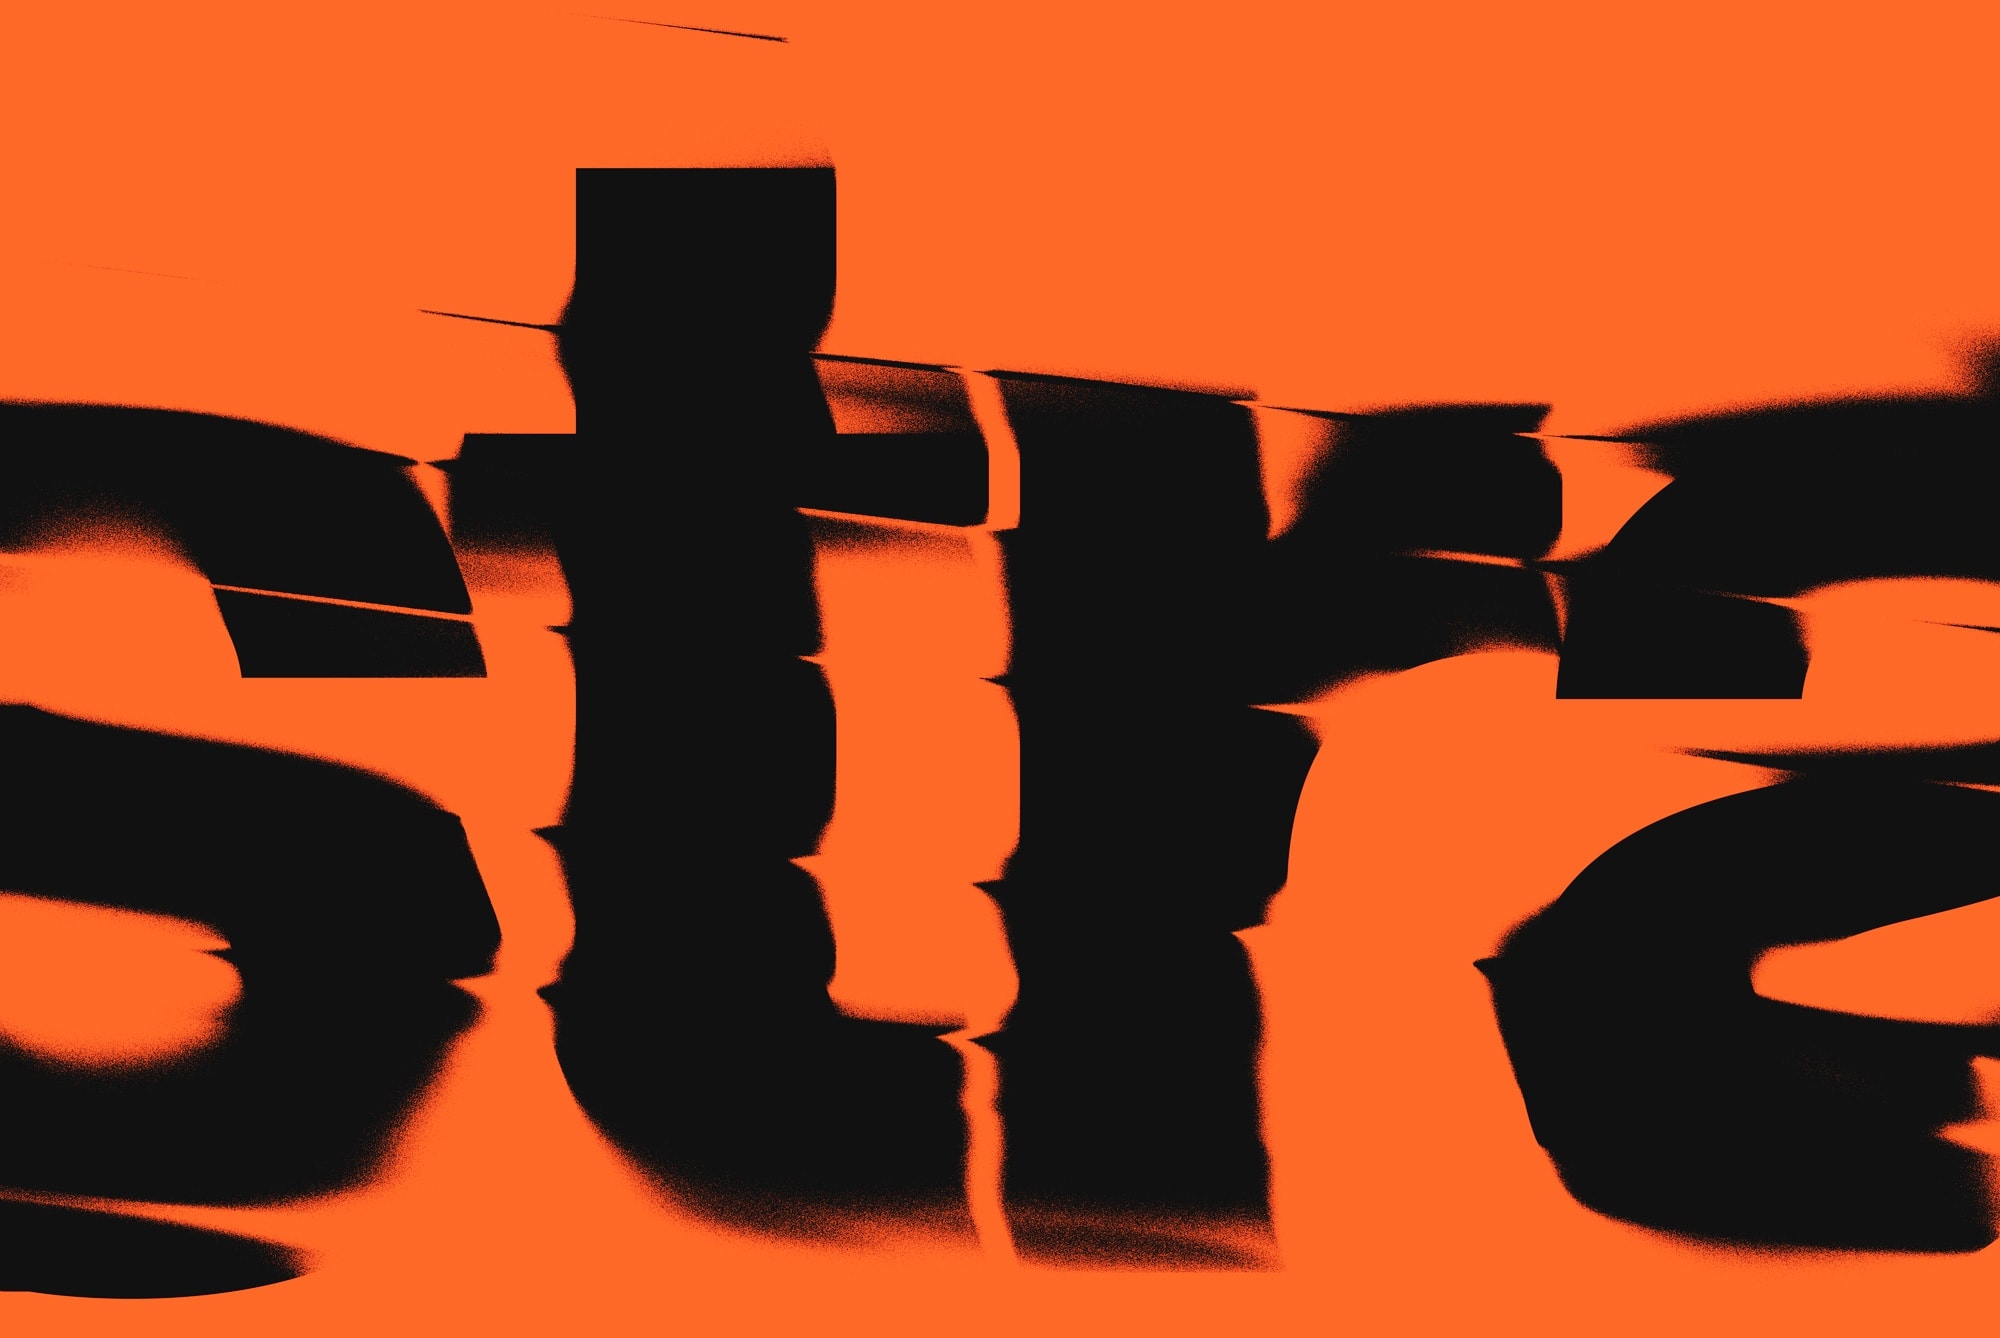 Abstract orange and black distorted text design perfect for bold graphics and eye-catching font presentations in digital asset marketplace.